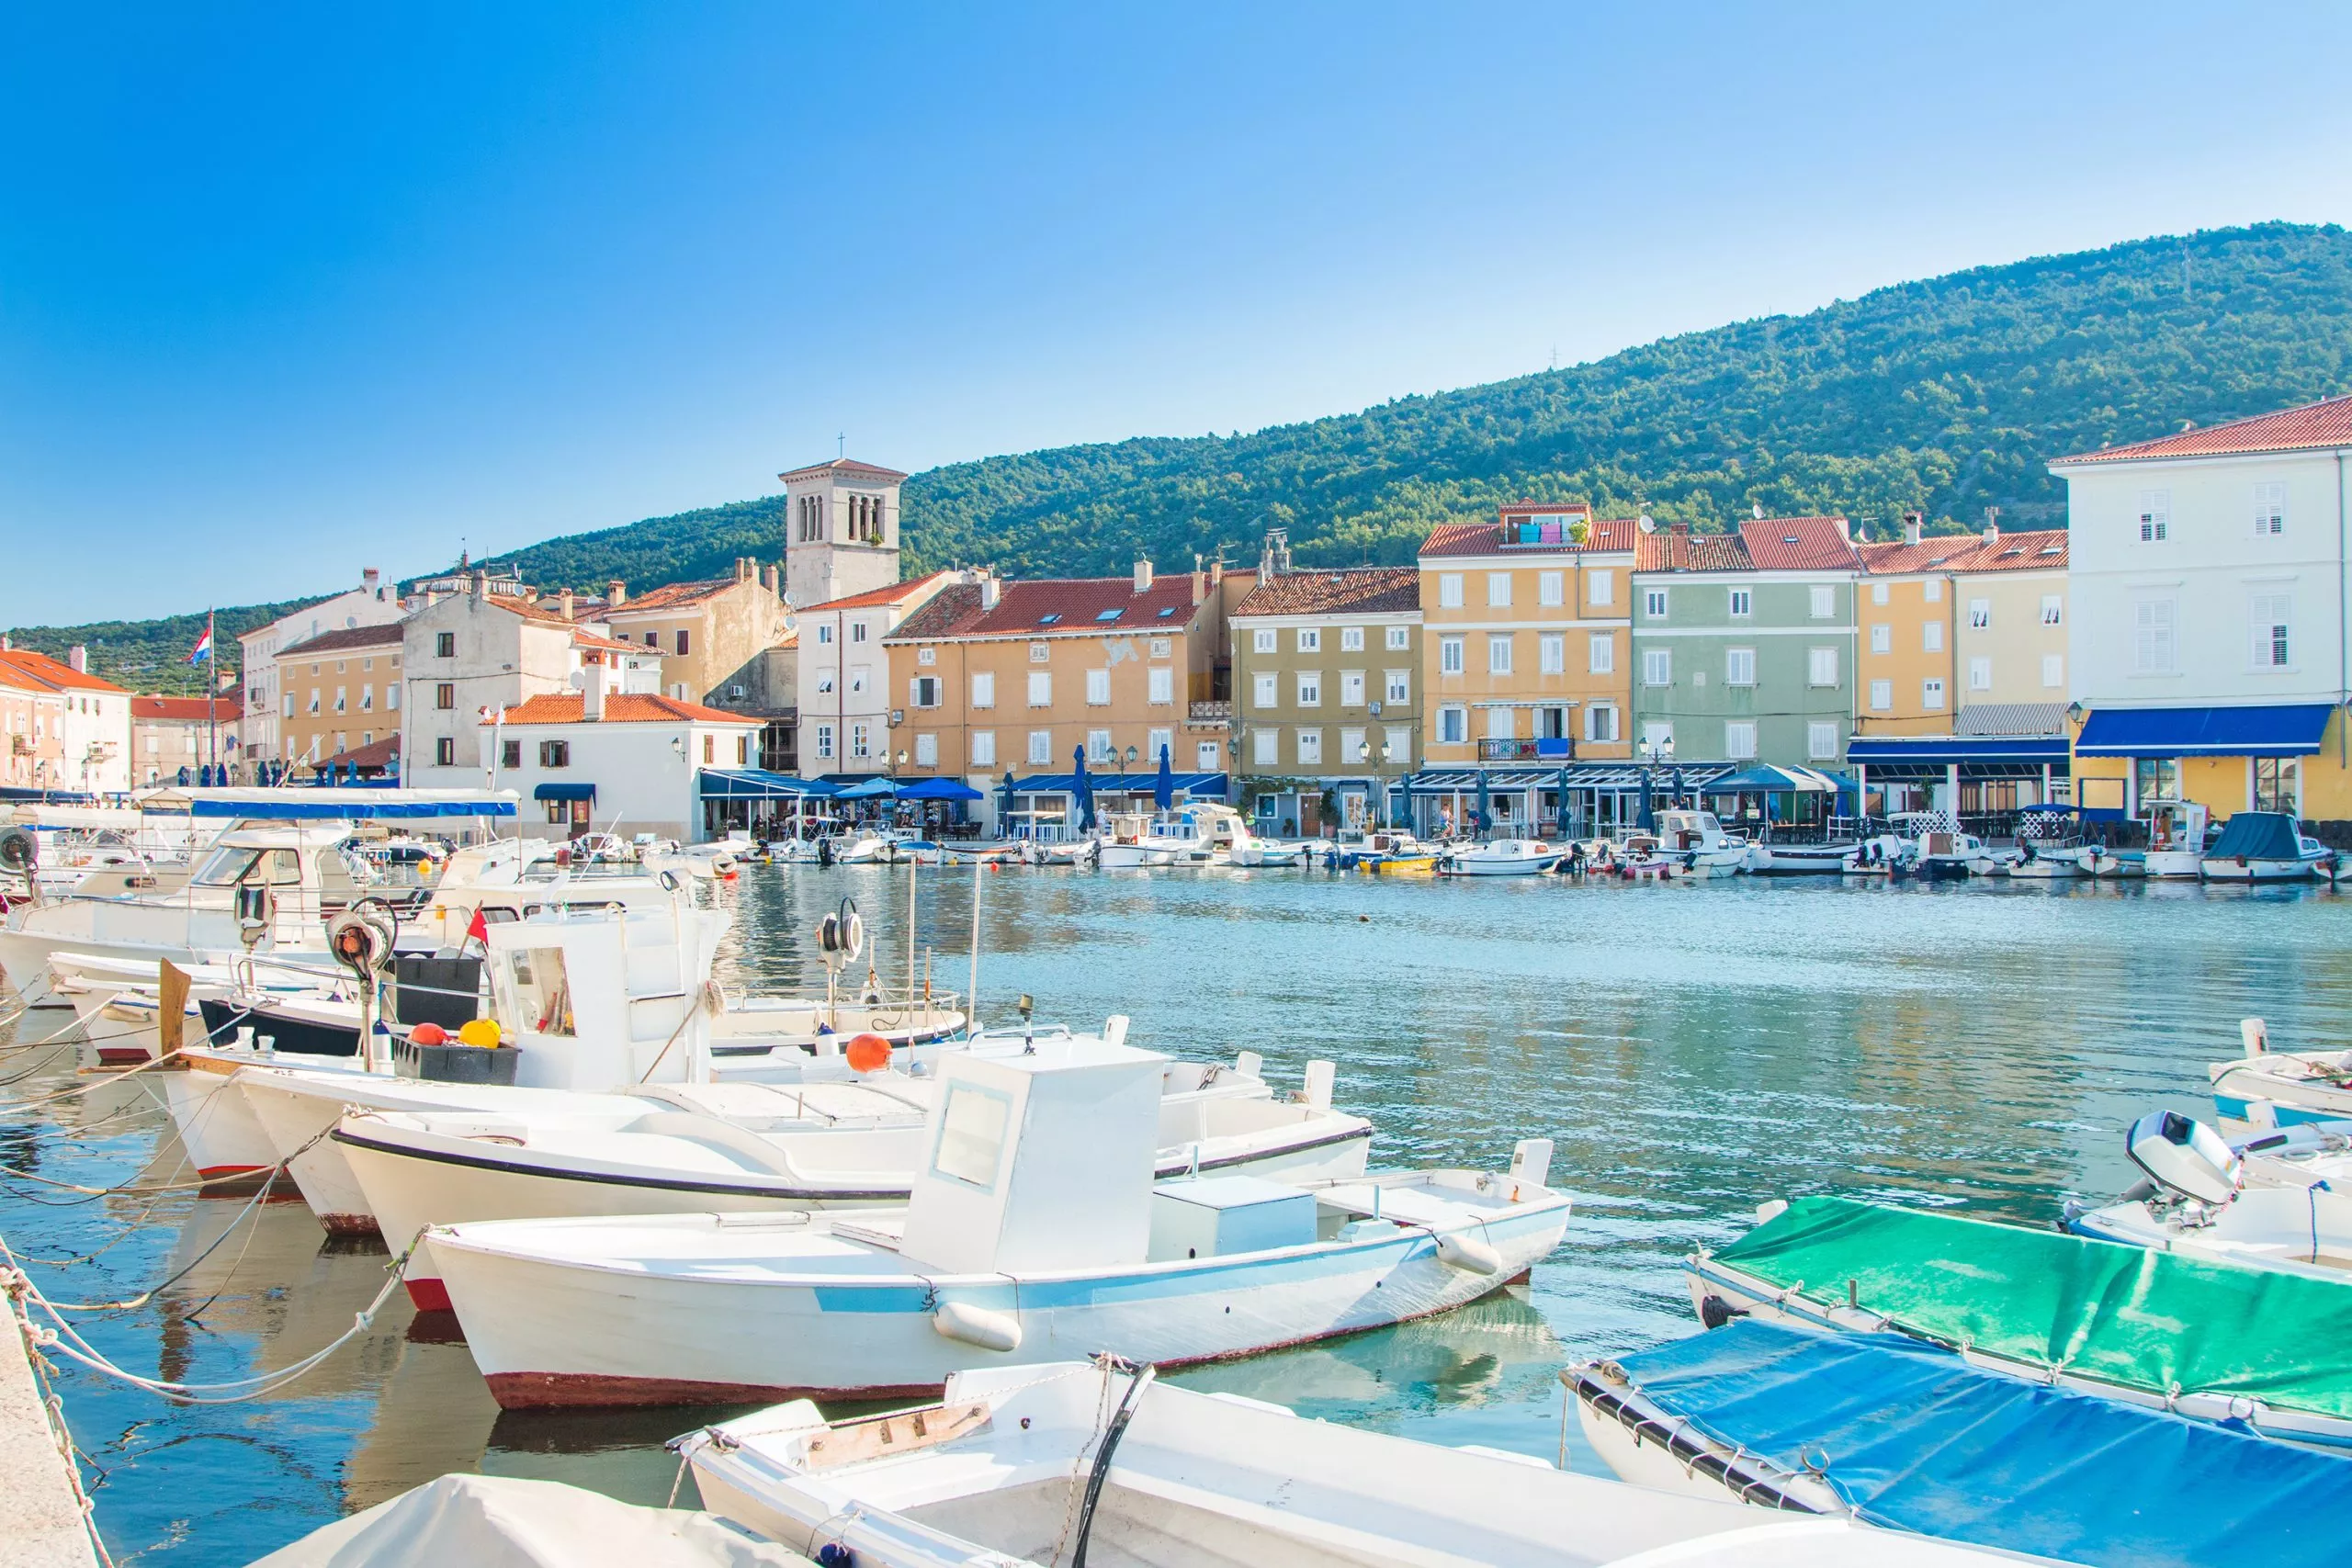 Fishing boats in marine in town of Cres, waterfront, Island of Cres, Kvarner, Croatia